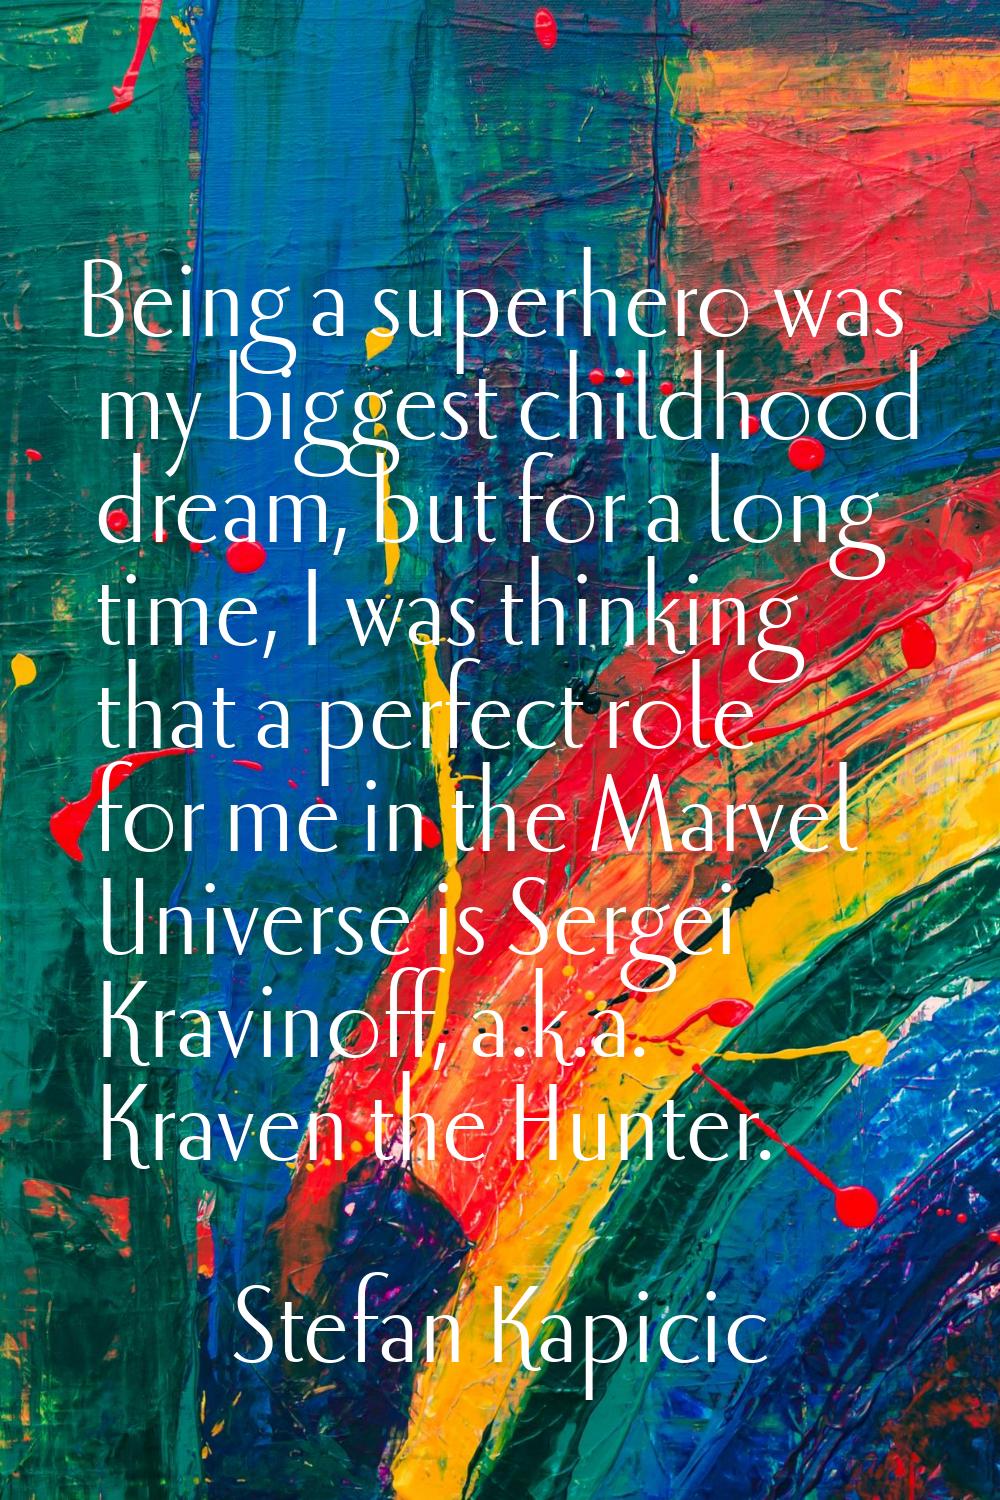 Being a superhero was my biggest childhood dream, but for a long time, I was thinking that a perfec